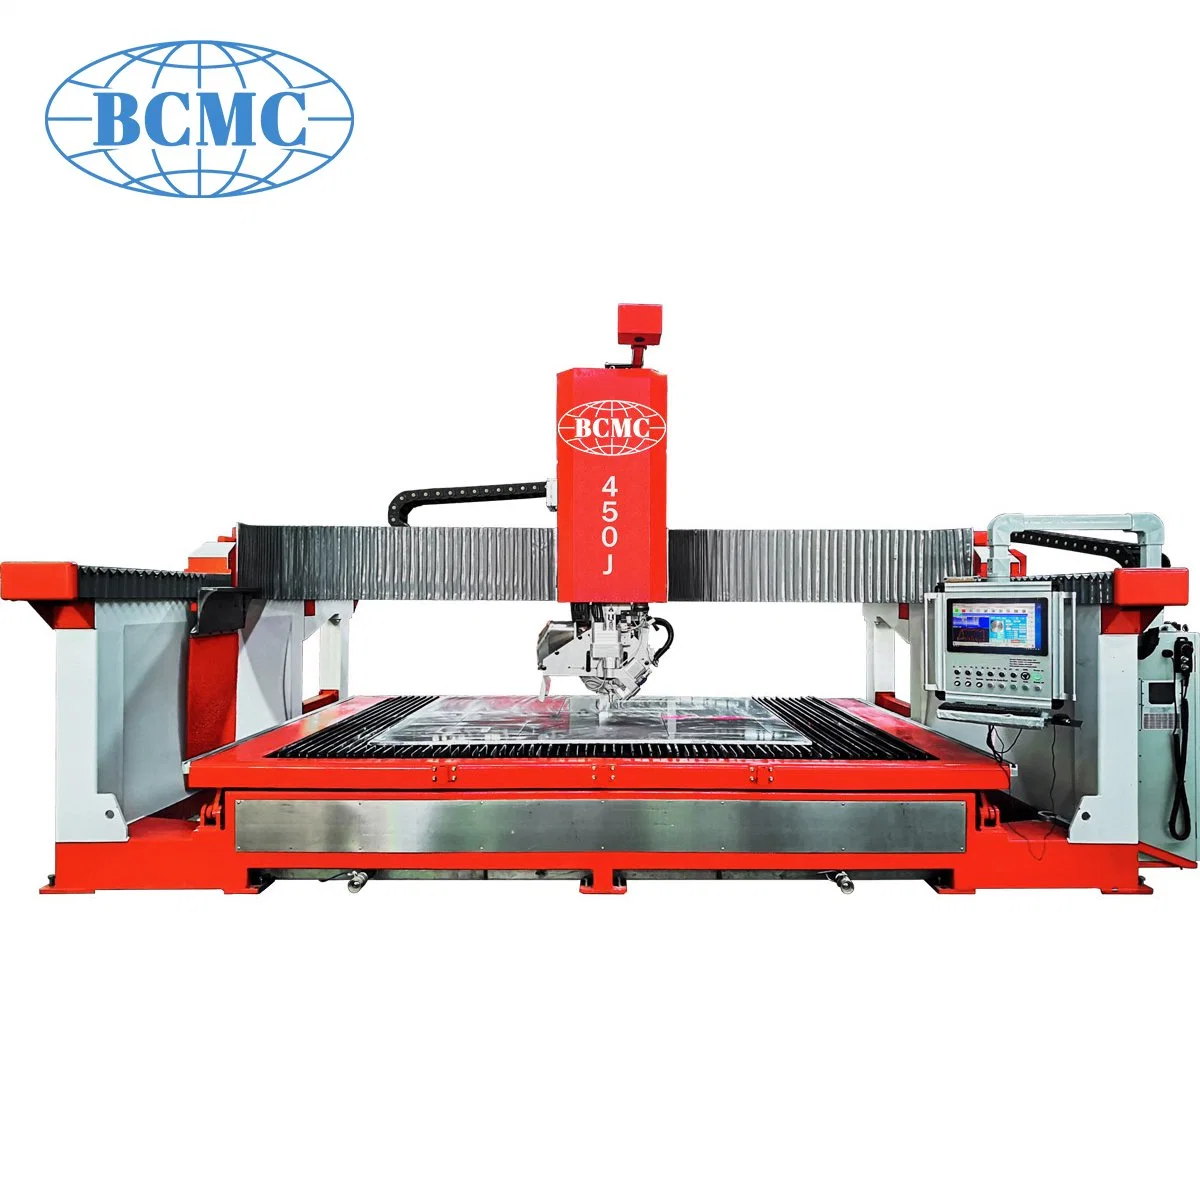 Bcmc Multi-Functional CNC Bridge Stone Cutter Saw High Pressure 5 Axis CNC Saw Jet Waterjet Cutting Machine with Countertop Processing Machining